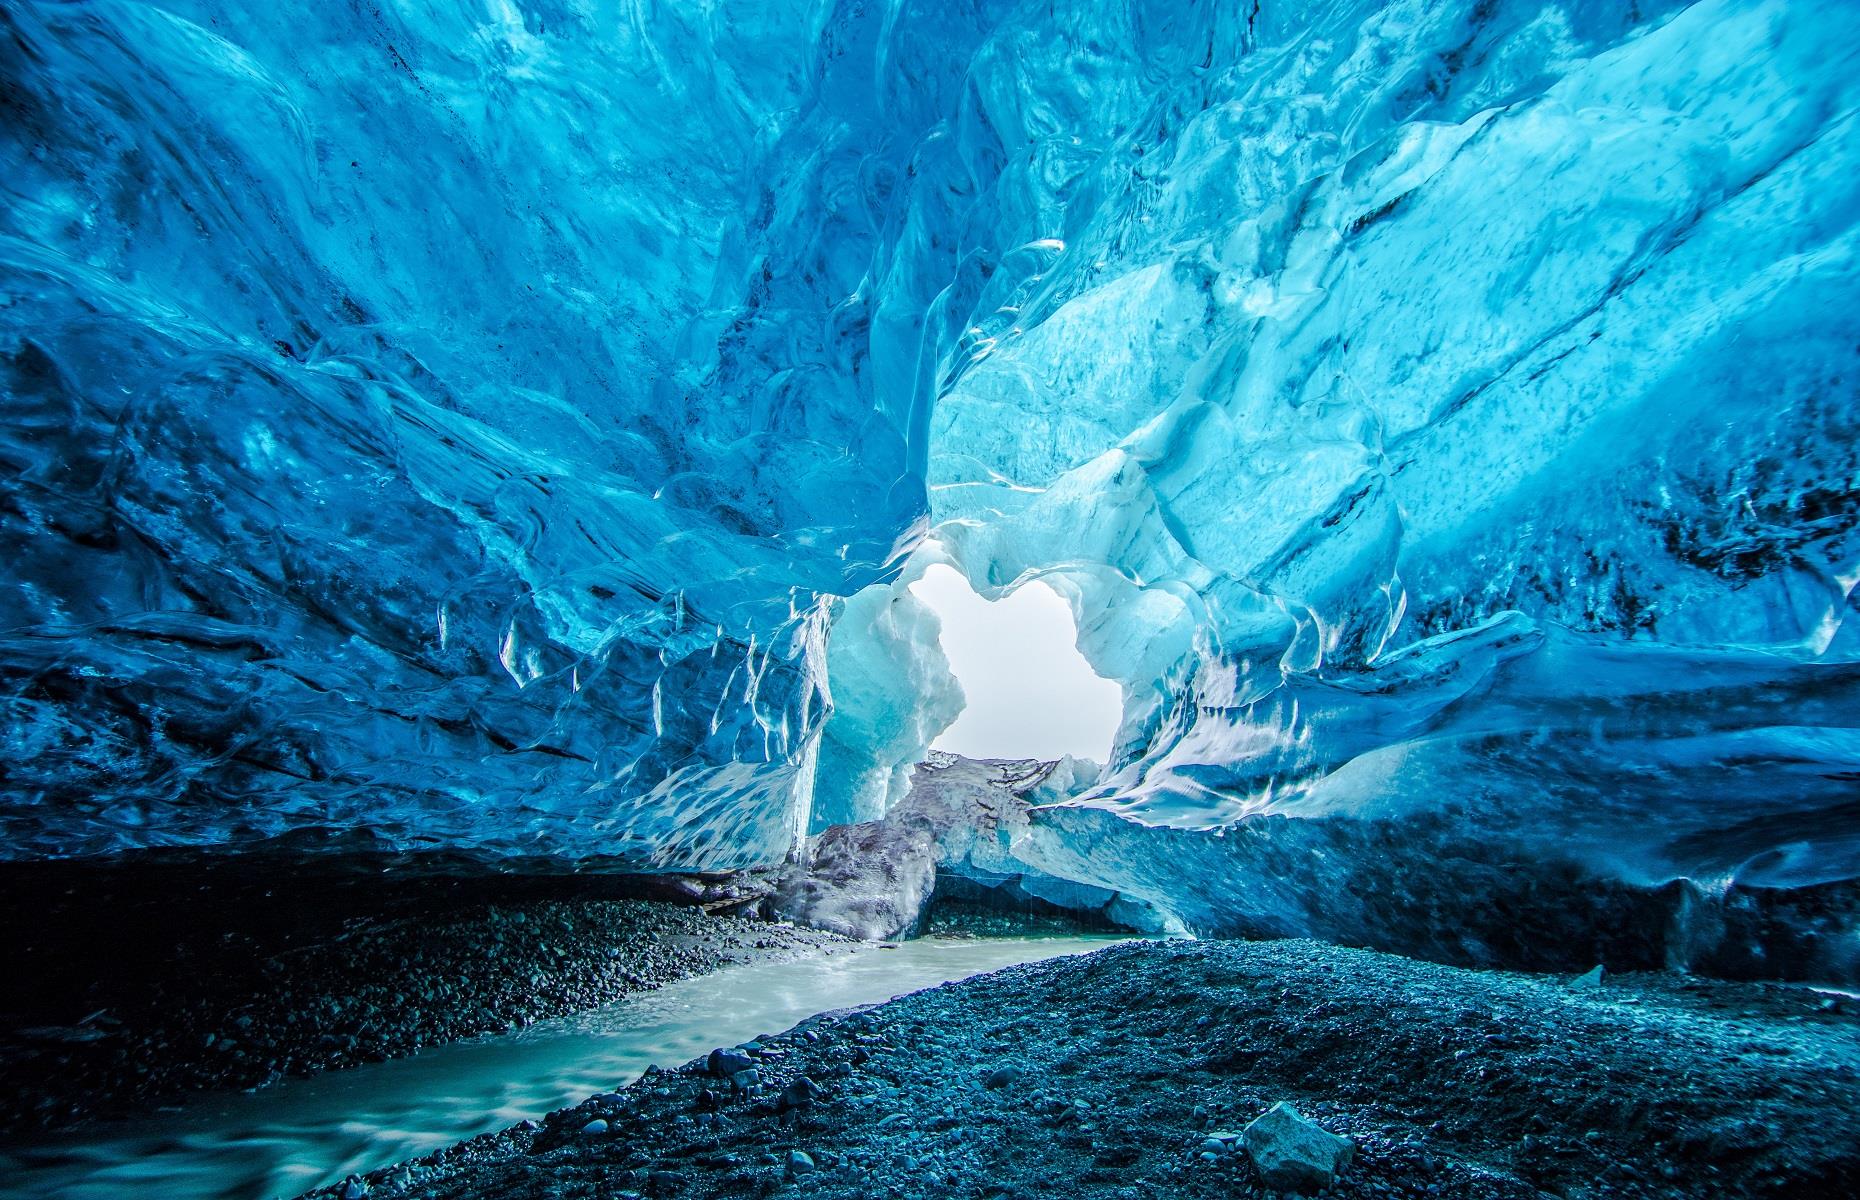 <p>There are plenty of things you can do in Iceland that you can't do anywhere else on Earth and stepping inside the Crystal Ice Cave is one of them. Also known as Breiðamerkurjökull Cave, this southern Iceland treasure can be found inside Vatnajökull Glacier, the largest and most voluminous ice cap in the country. The natural cave dates back around 1,200 years and was formed thanks to the weight of the ice pressing out oxygen. Mesmerizing and miraculous in equal measure, this awe-inspiring icy wonder is unmissable.</p>